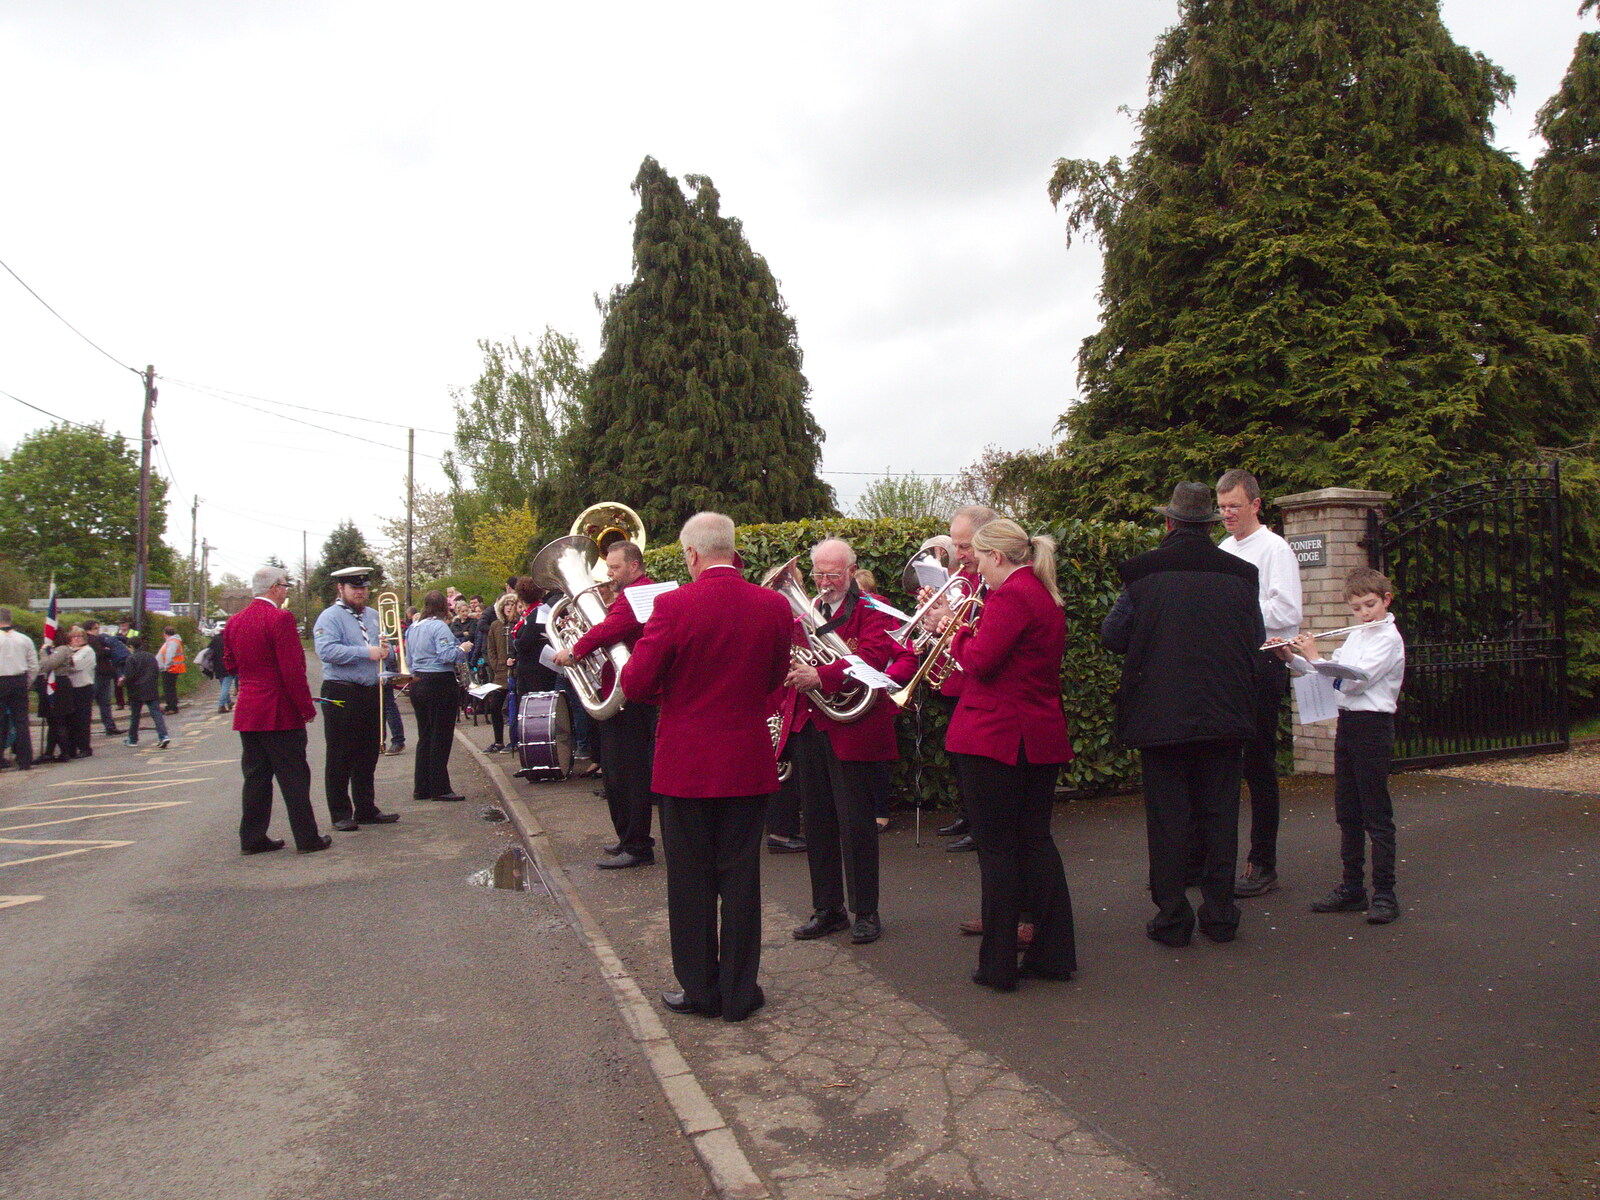 The band assembles from A St. George's Day Parade, Dickleburgh, Norfolk - 28th April 2019